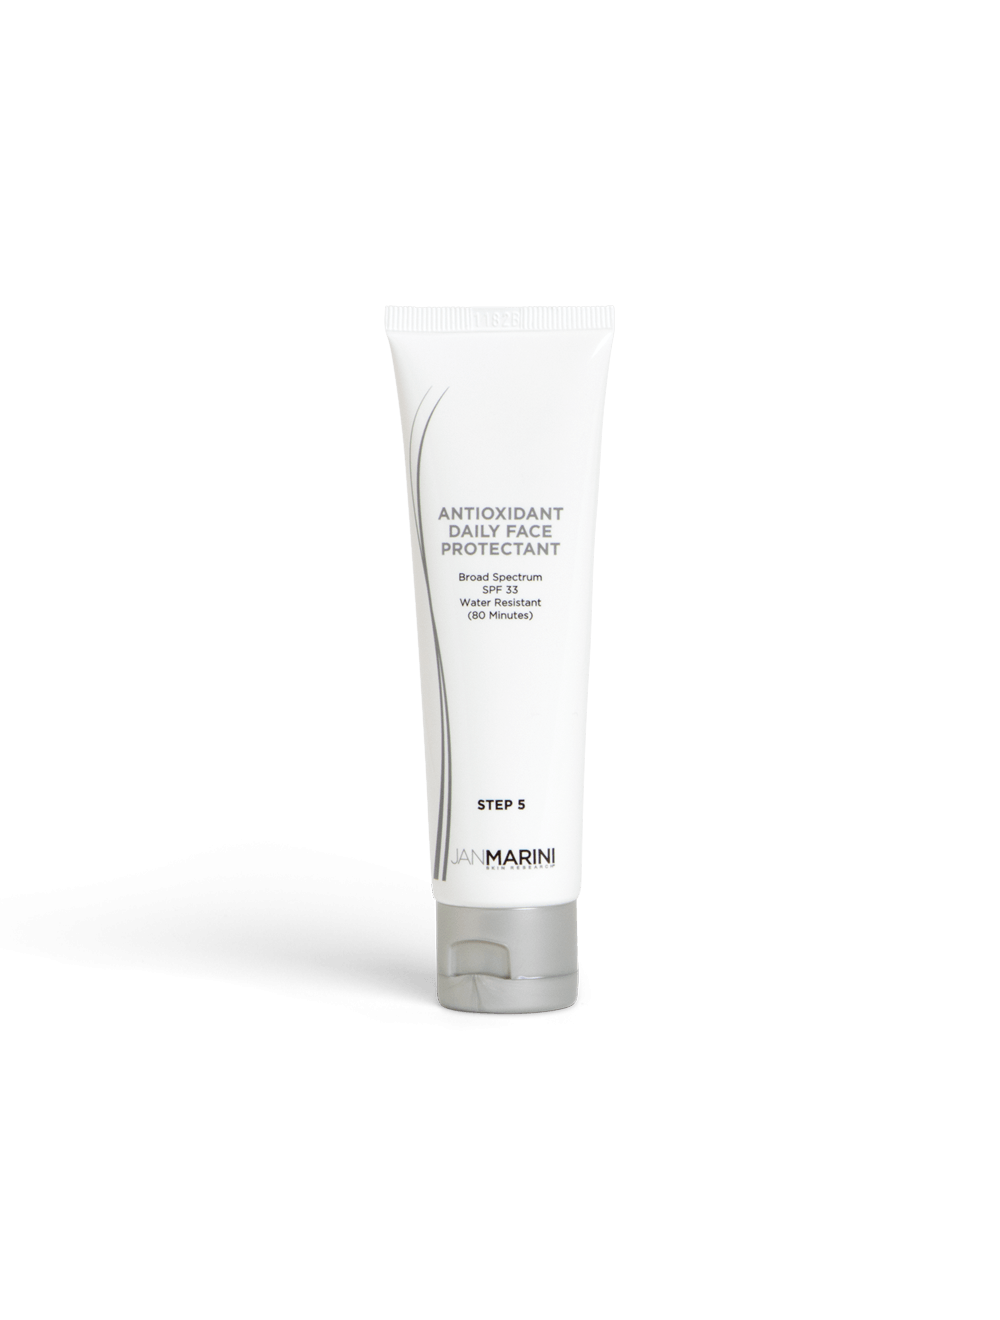 Antioxidant Daily Face Protectant - Pearl Skin Studio